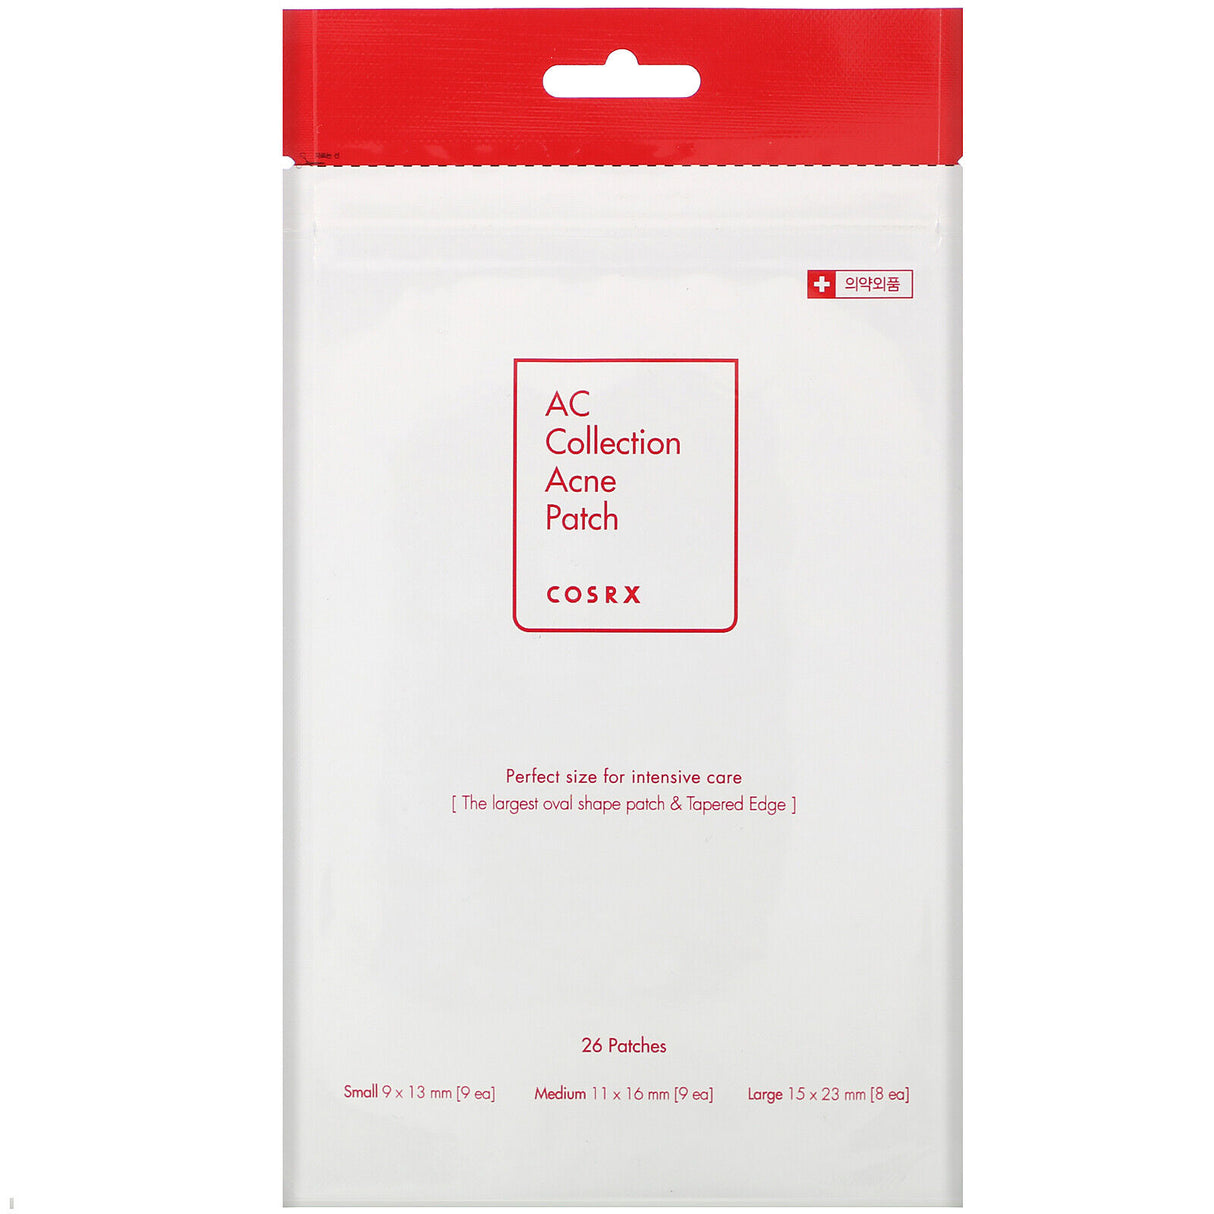 Korea Cosrx Acne Patch Concealer Acne Patch First Aid Repair Artificial Skin Suction Pus Acne Ultra-thin Can Apply Makeup